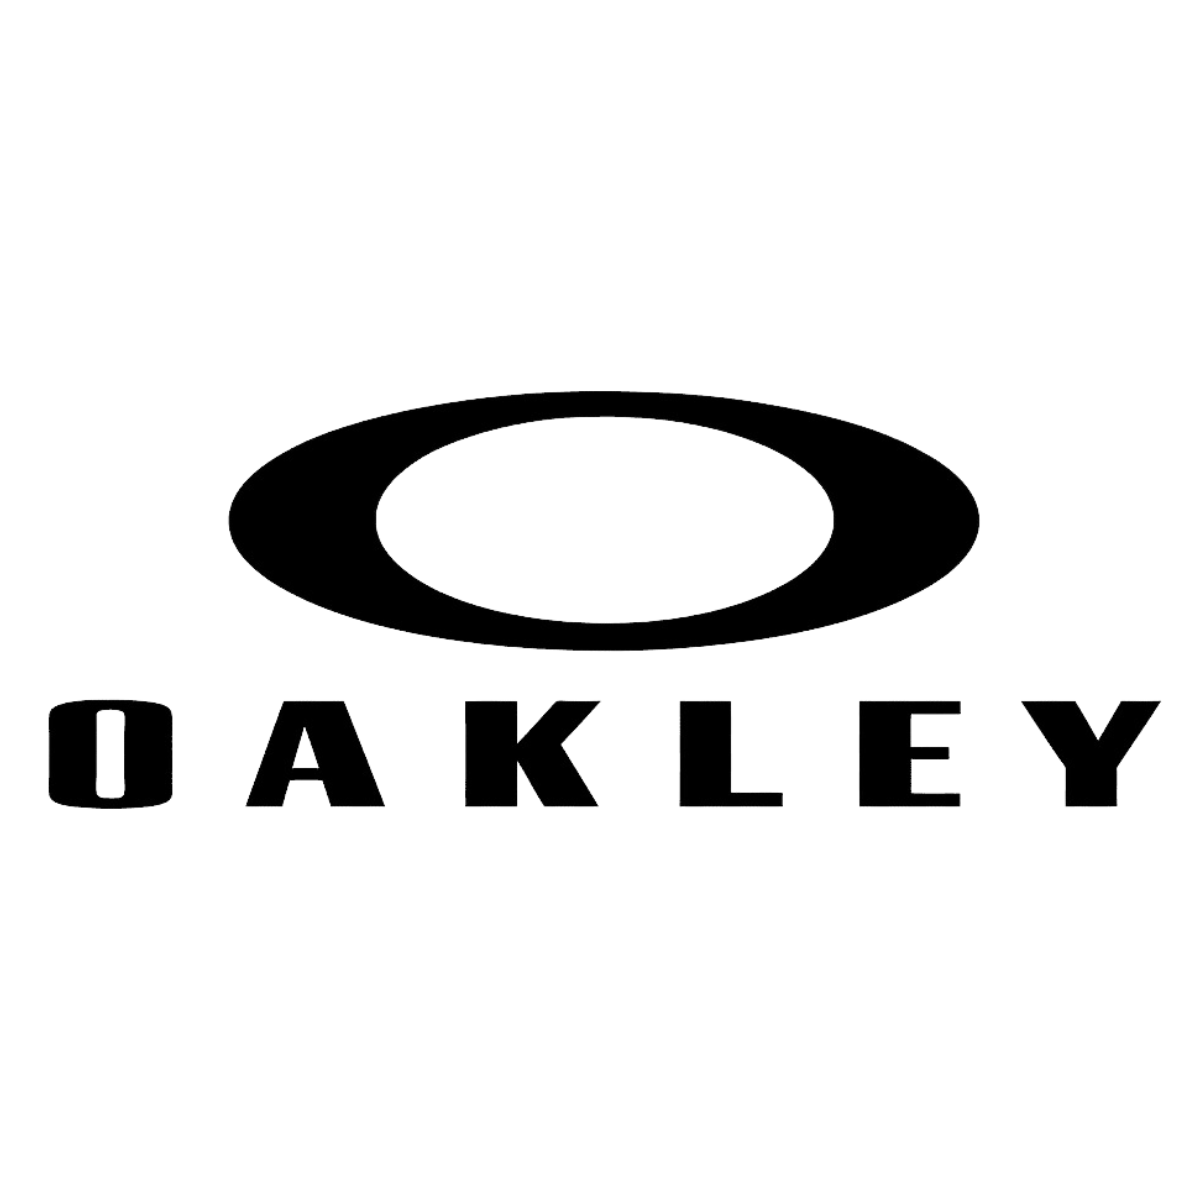 "Oakley Eyewear: High-Performance Sunglasses and Optical Frames for Athletes and Outdoor Enthusiasts"